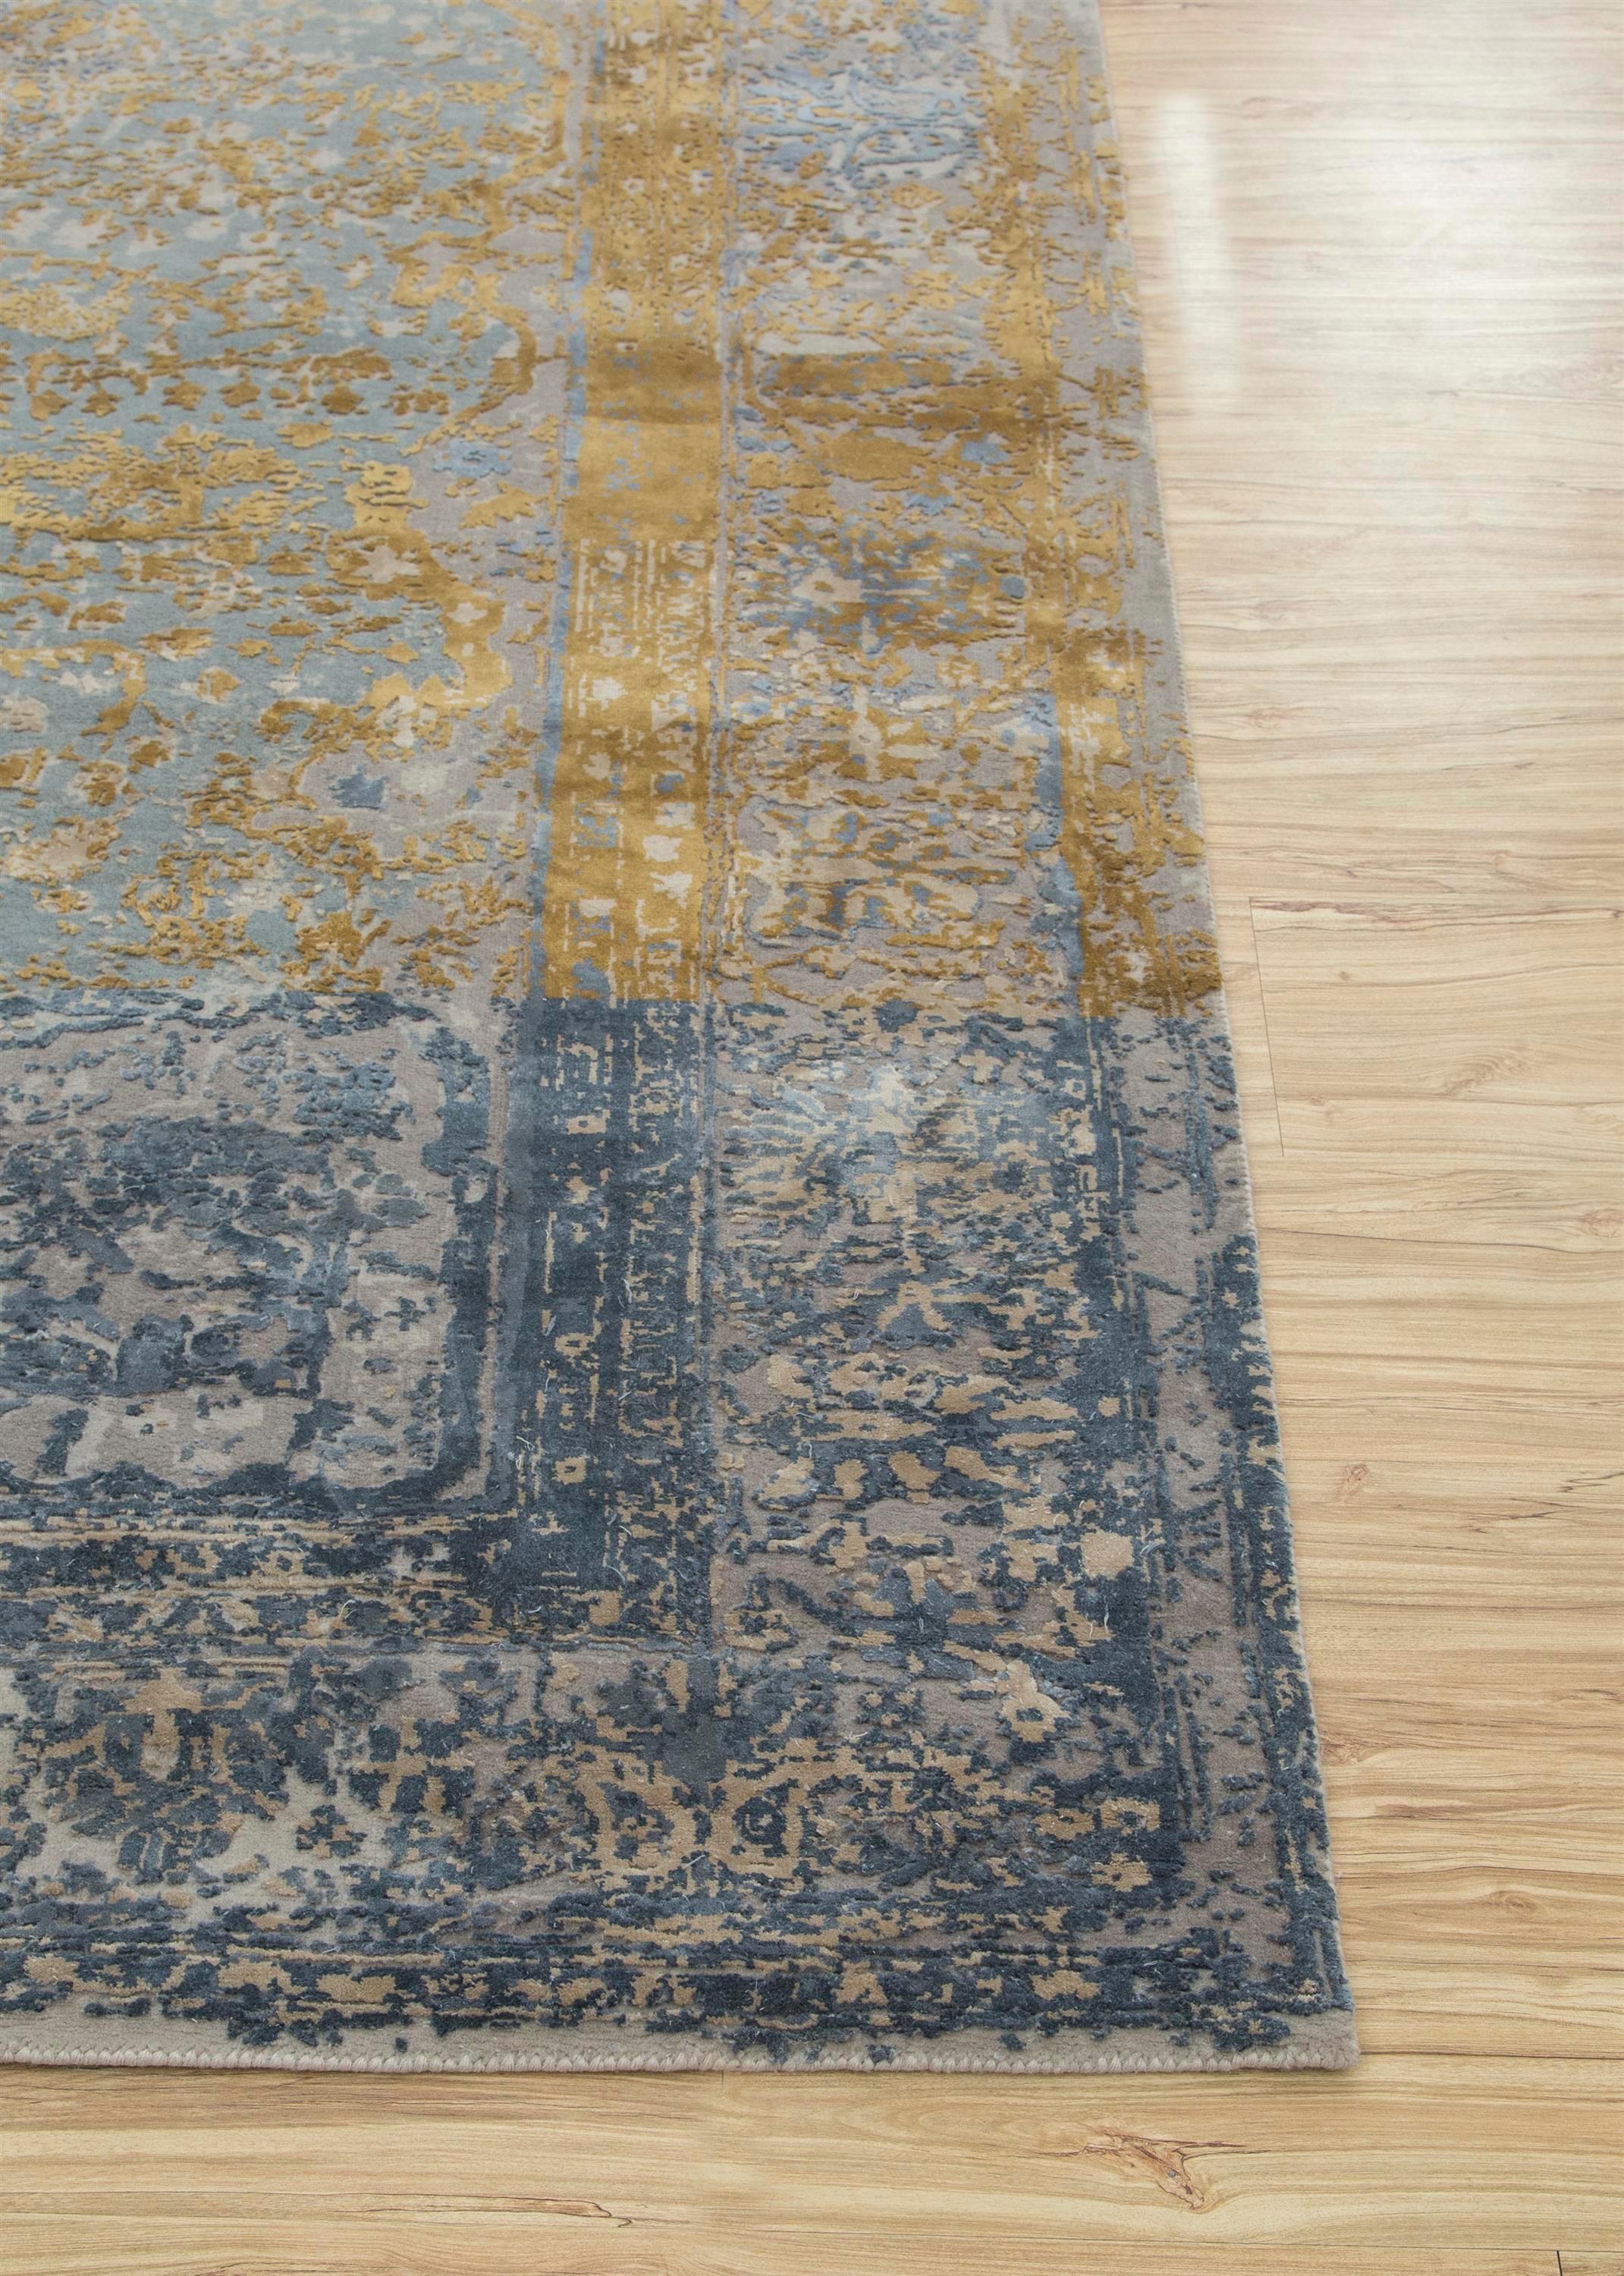 Dive into the ethereal beauty of this hand-knotted rug . The blue haze ground and crystal gray border seamlessly blend modern design with intricate tales lost in translation between hand and machine. This masterpiece showcases elements like